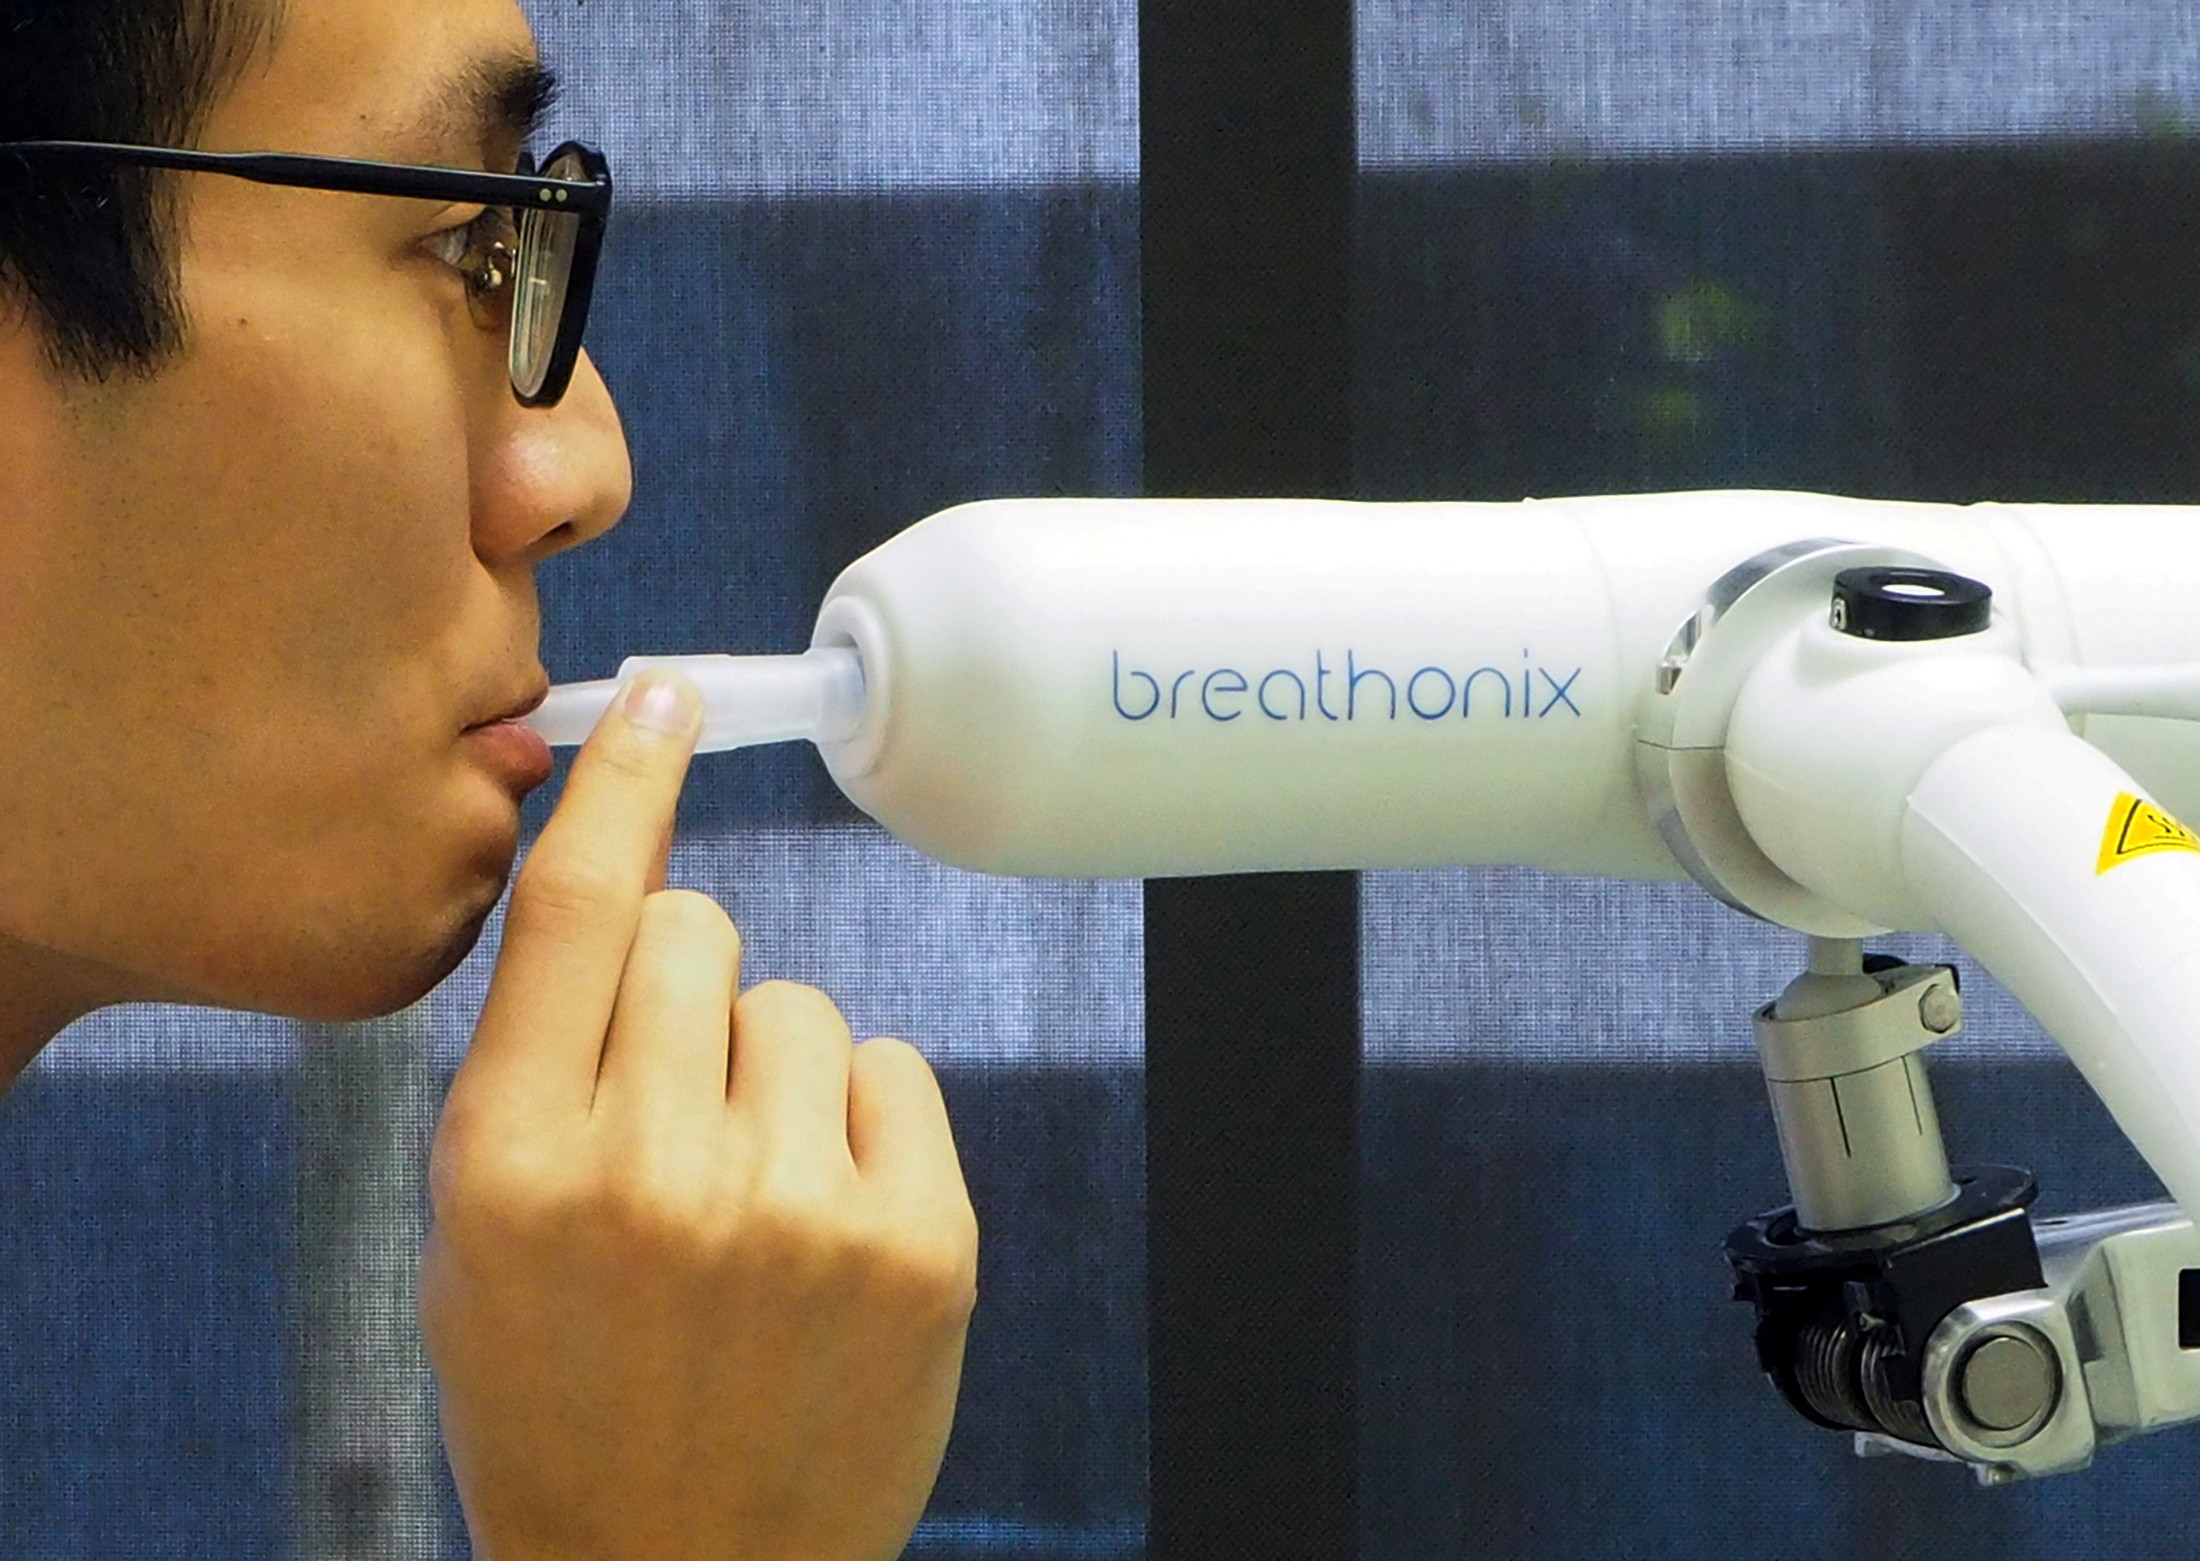 a staff member demonstrates the usage of breathonix breathalyzer test kit developed by breathonix a start up by the national university of singapore able to detect the coronavirus disease covid 19 within a minute according to the company at their laboratory in singapore october 29 2020 photo reuters